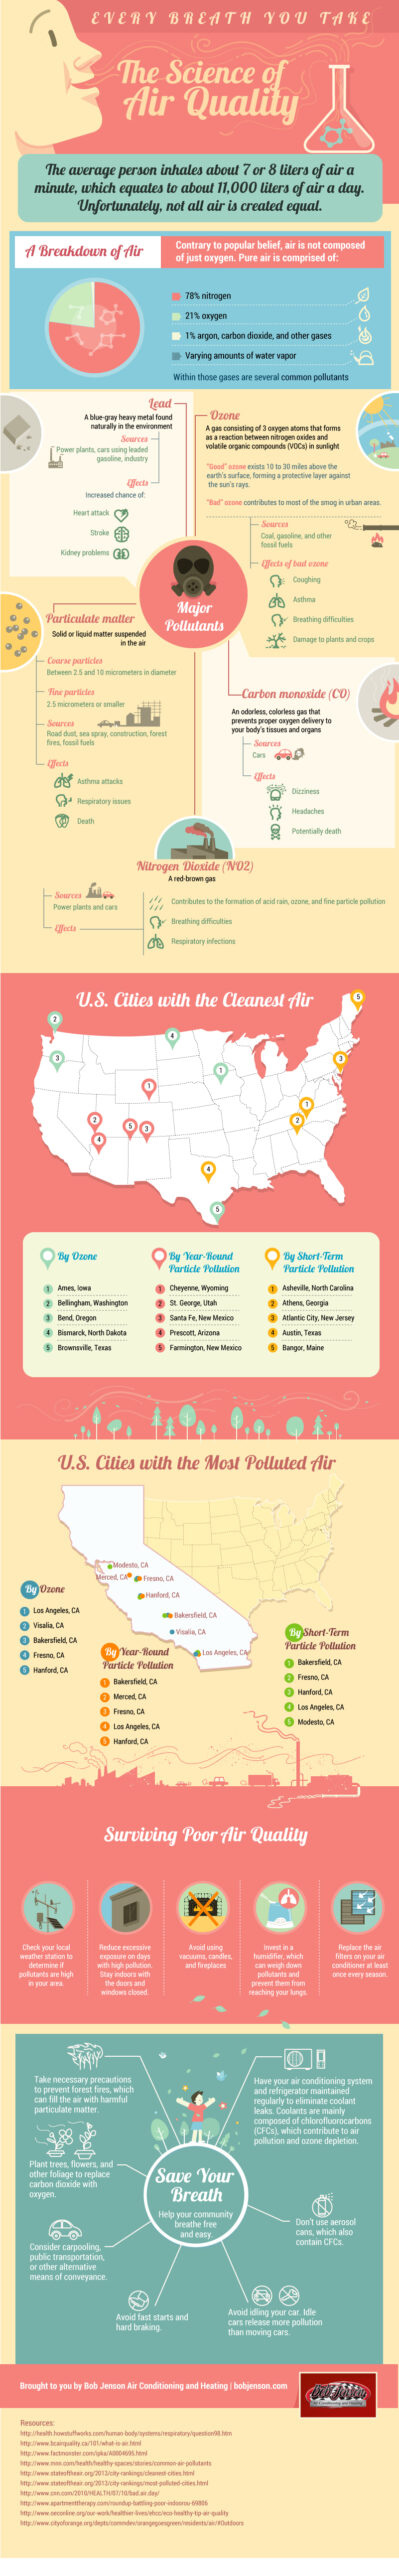 Infographic about the science of air quality dangers and how to protect yourself